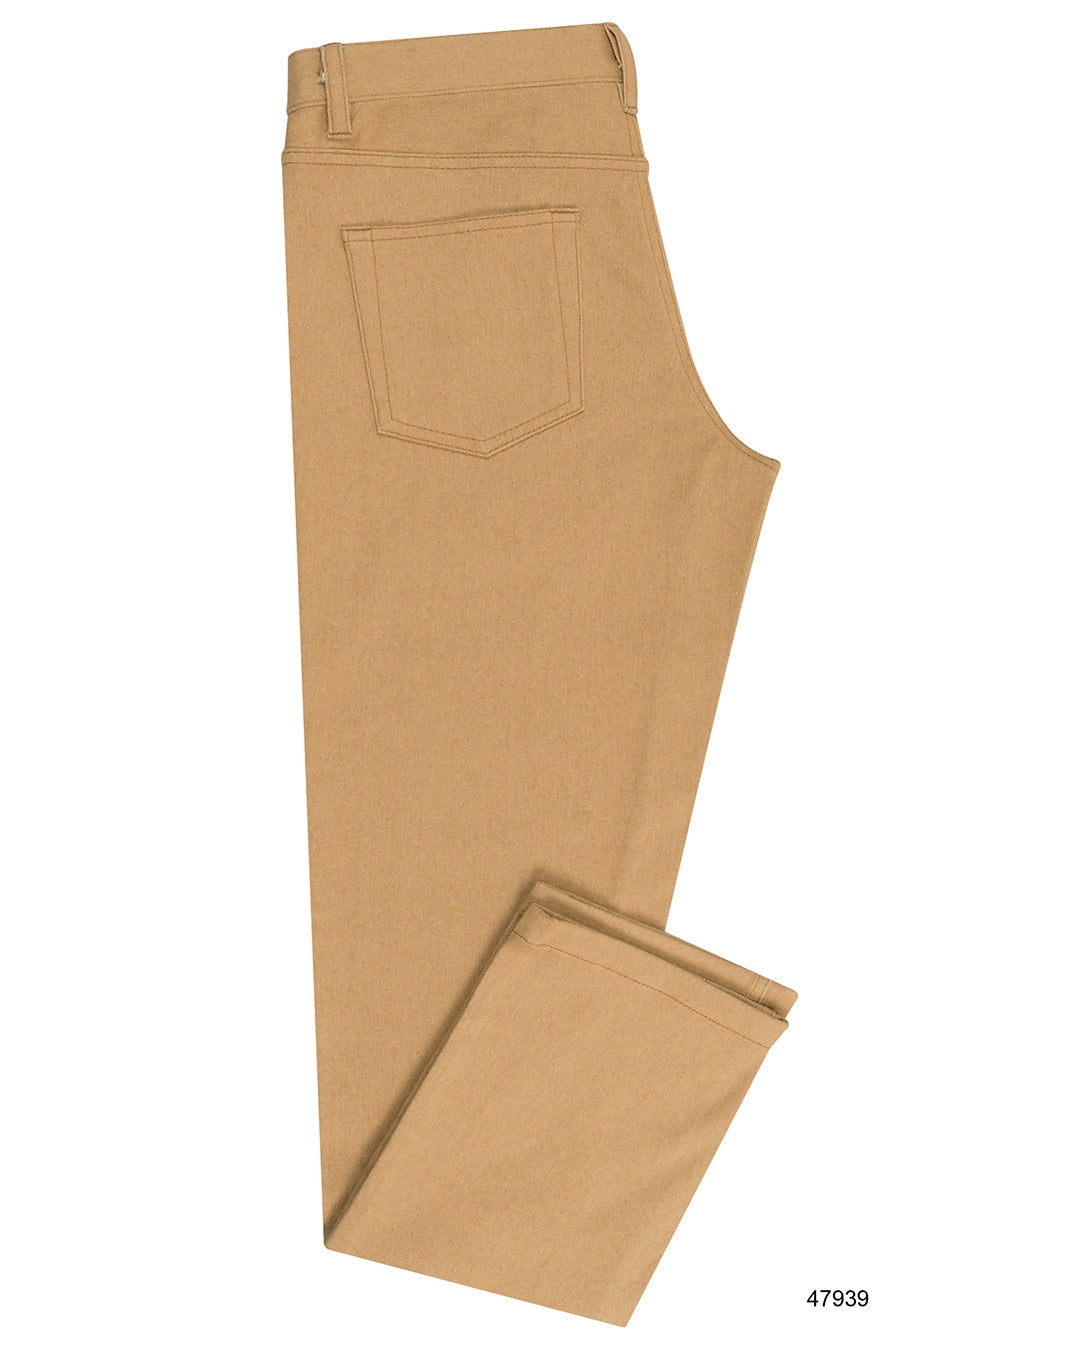 Side view of denim jeans for men by Luxire in sandstone